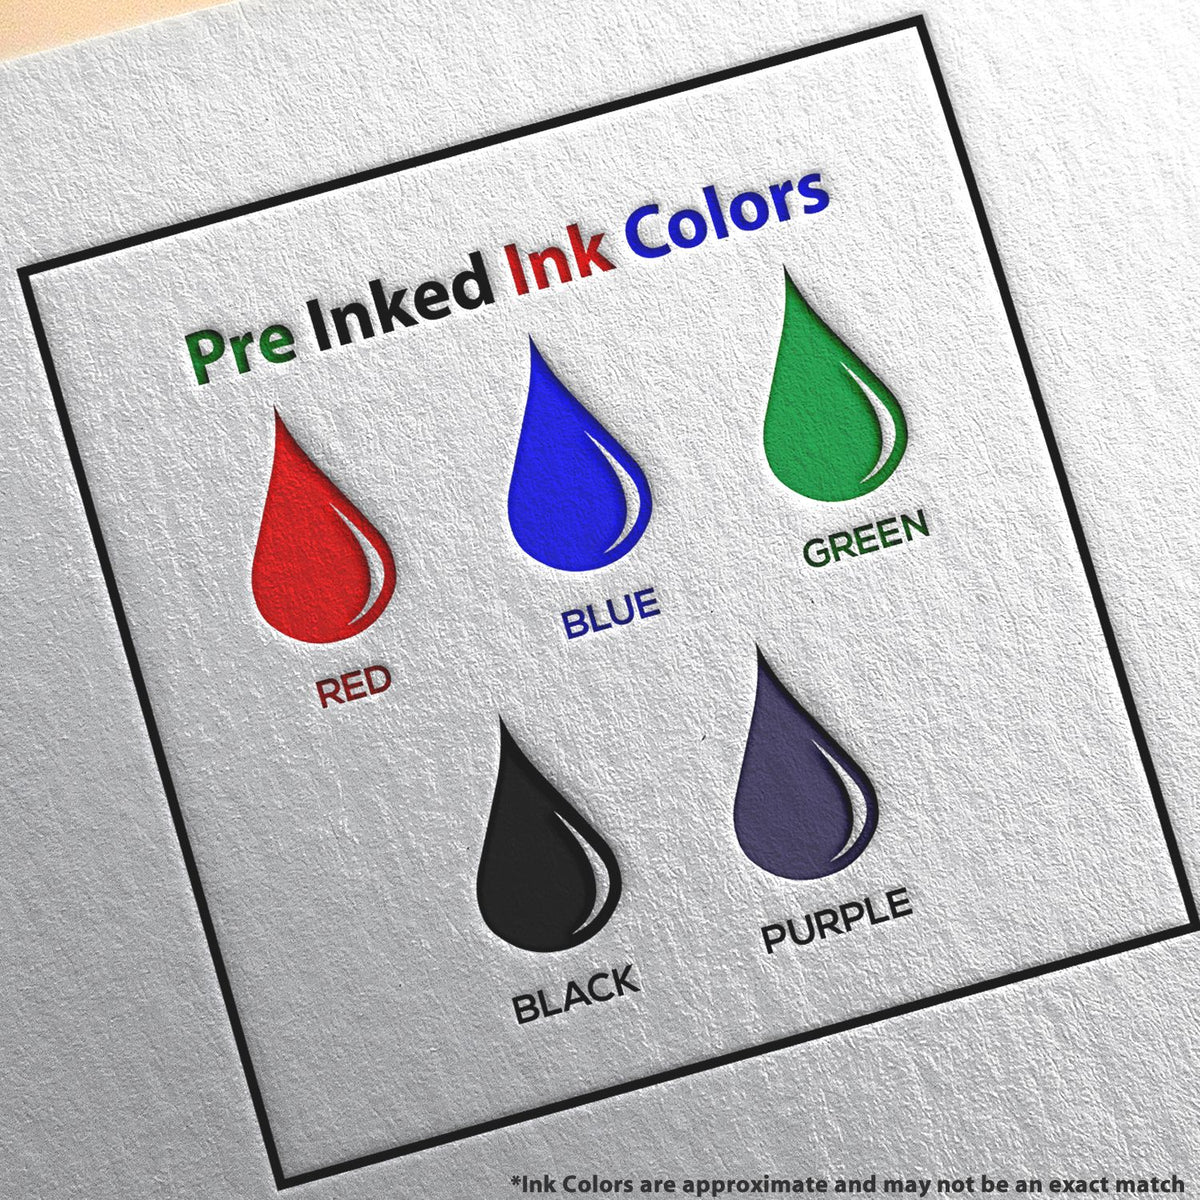 A picture showing the different ink colors or hues available for the Premium MaxLight Pre-Inked Nevada Engineering Stamp product.